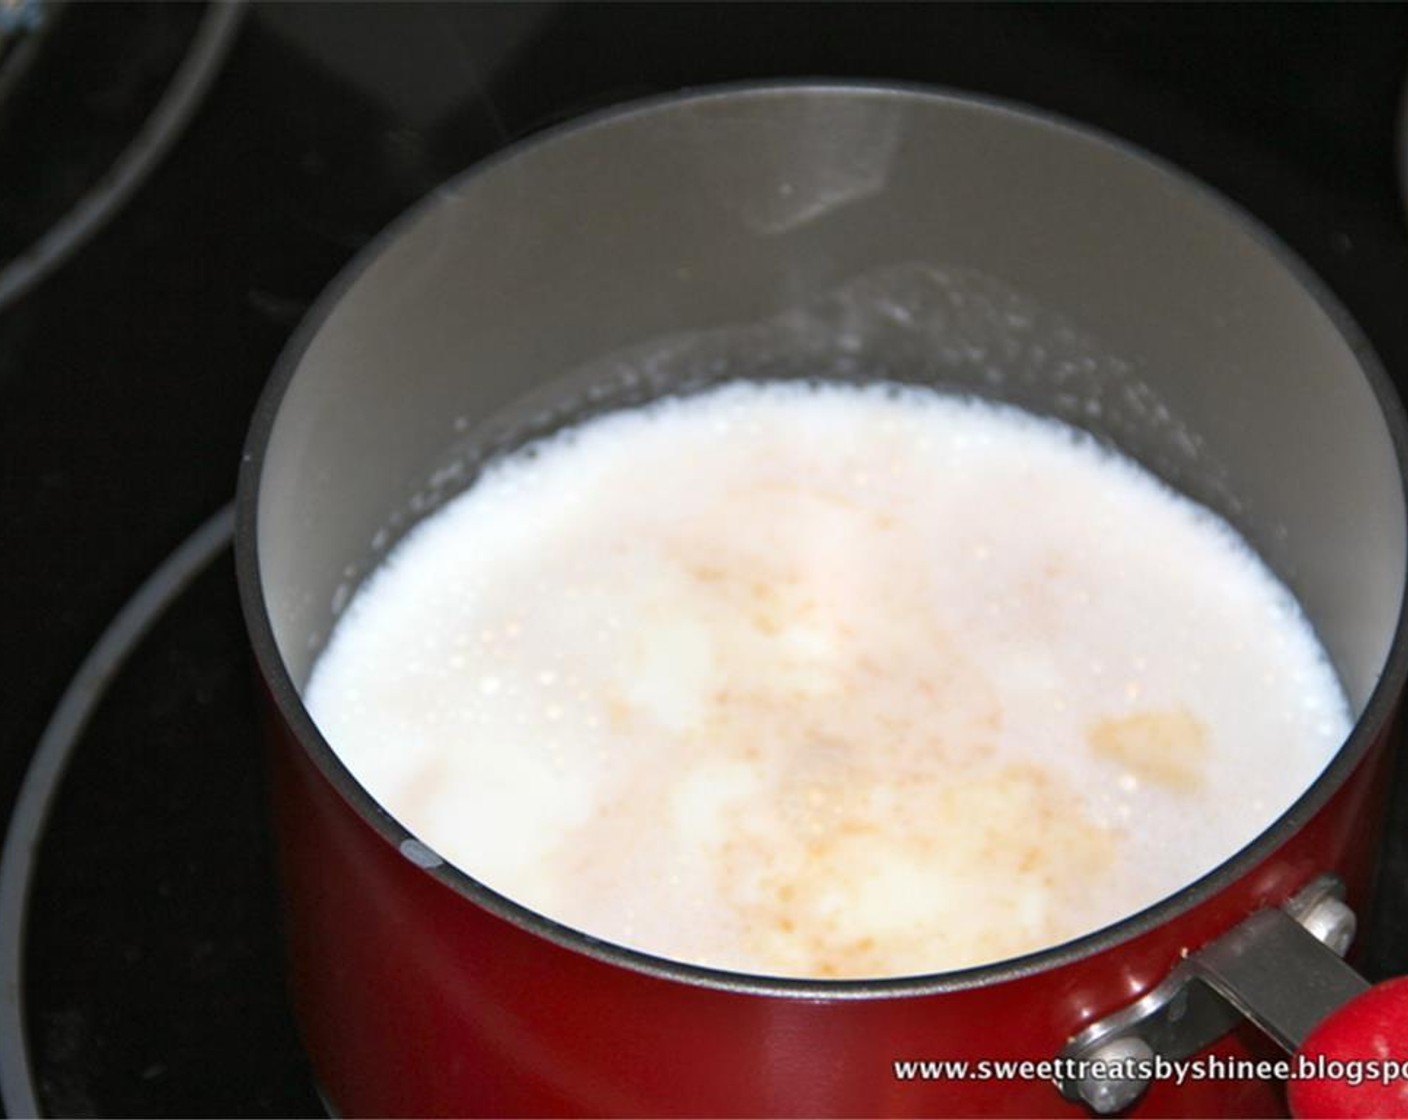 step 2 Bring Milk (17 fl oz) and Vanilla Extract (1 tsp) to a boil. Once it boils, turn off the heat.